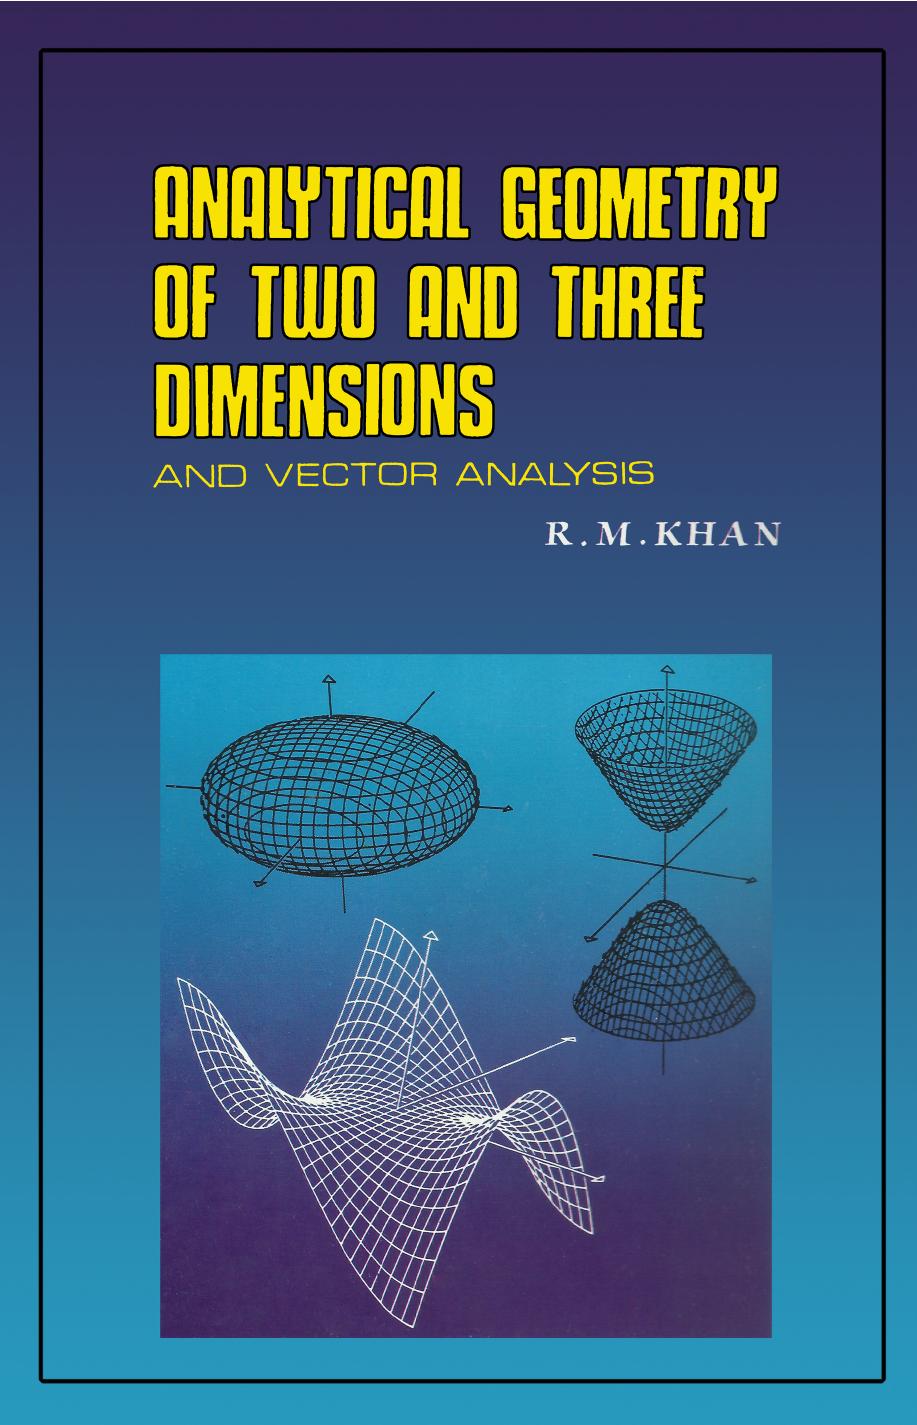 Analytical Geometry of Two and Three Dimensions and Vector Analysis by KHAN